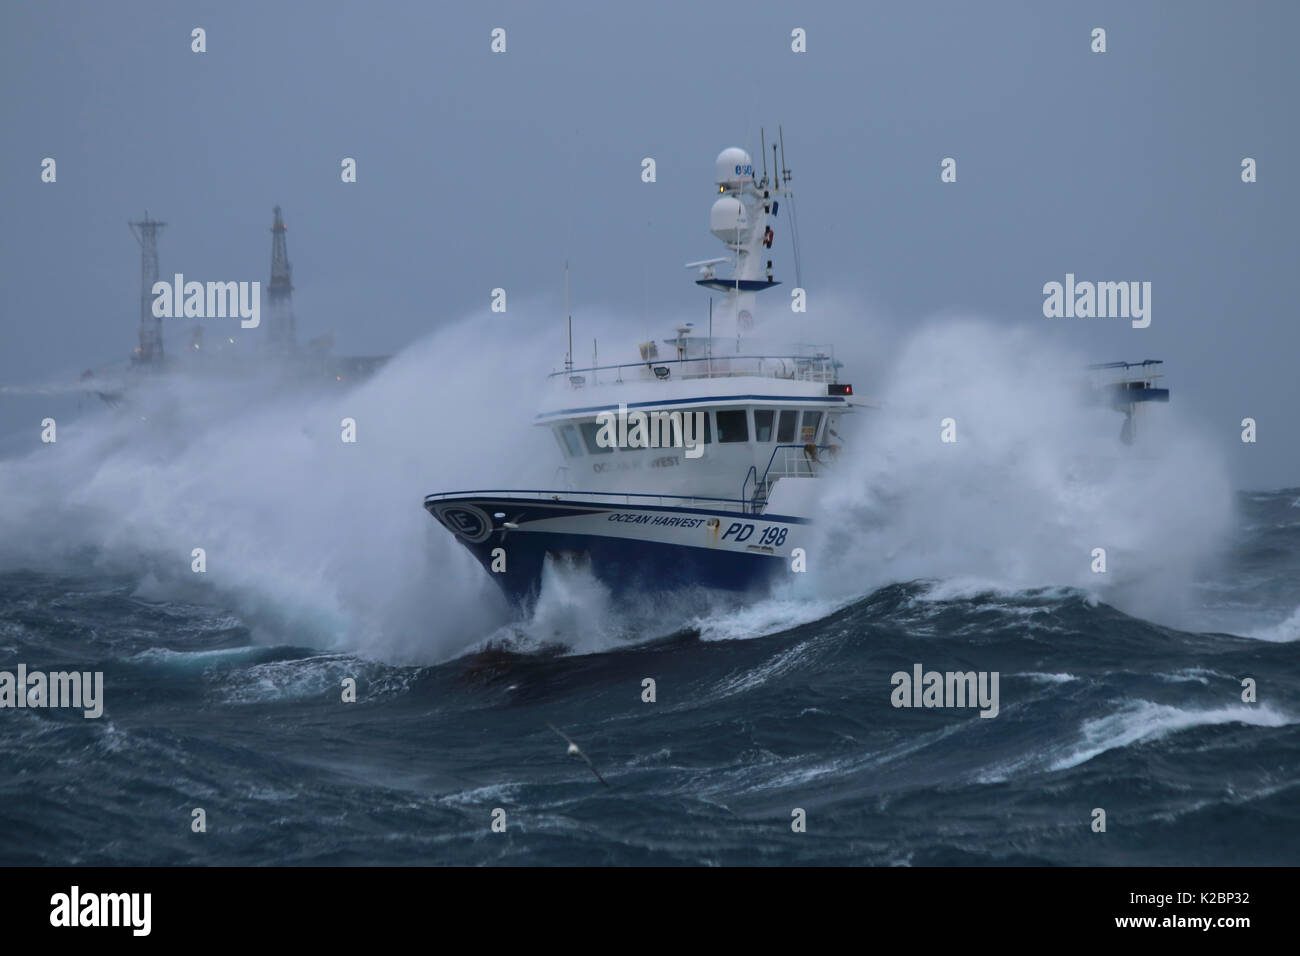 Fishing vessel 'Ocean Harvest' in heavy weather on the North Sea, January 2016.  Property released. Stock Photo